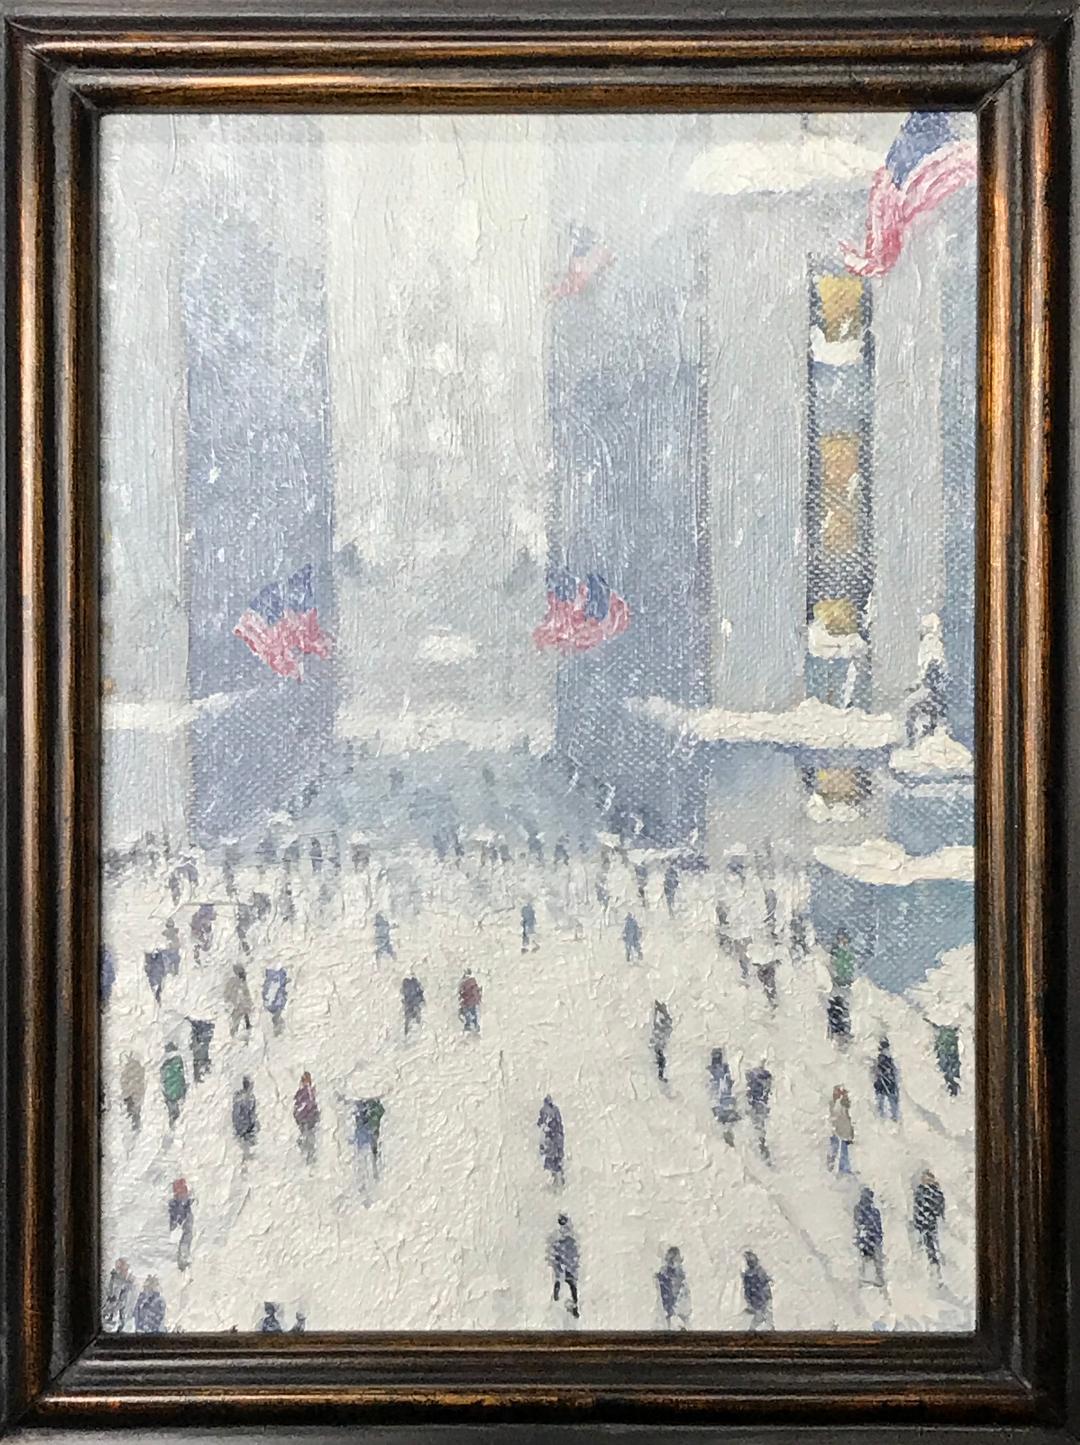 New York City Wall Street Flags Contemporary Oil Painting by Michael Budden 1